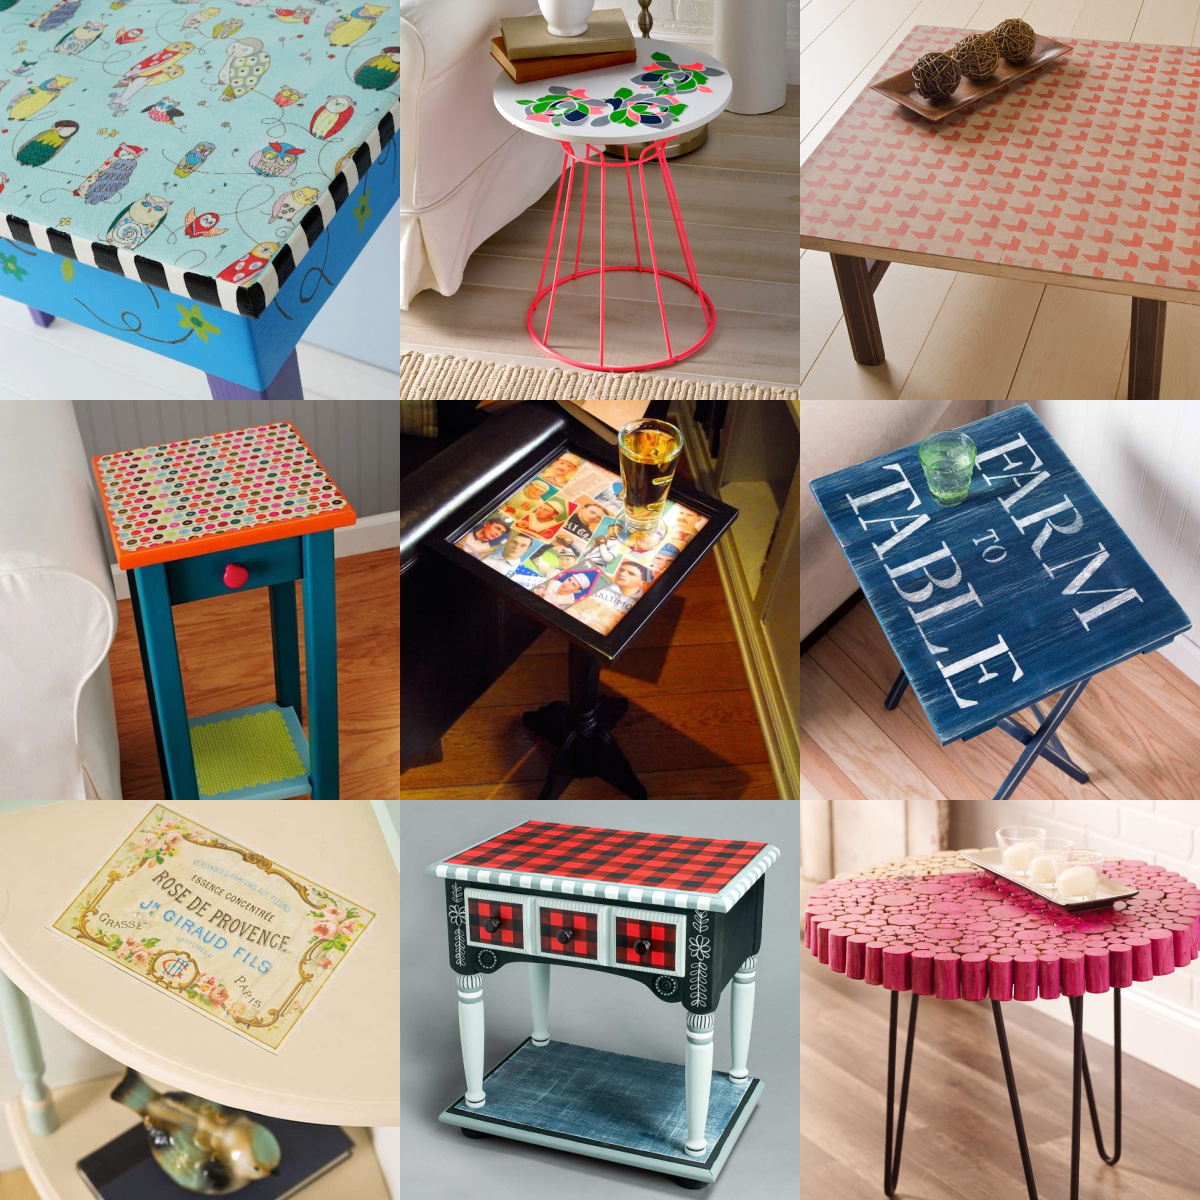 hærge falanks ballade 25+ Table Top Ideas to Try This Weekend - Mod Podge Rocks